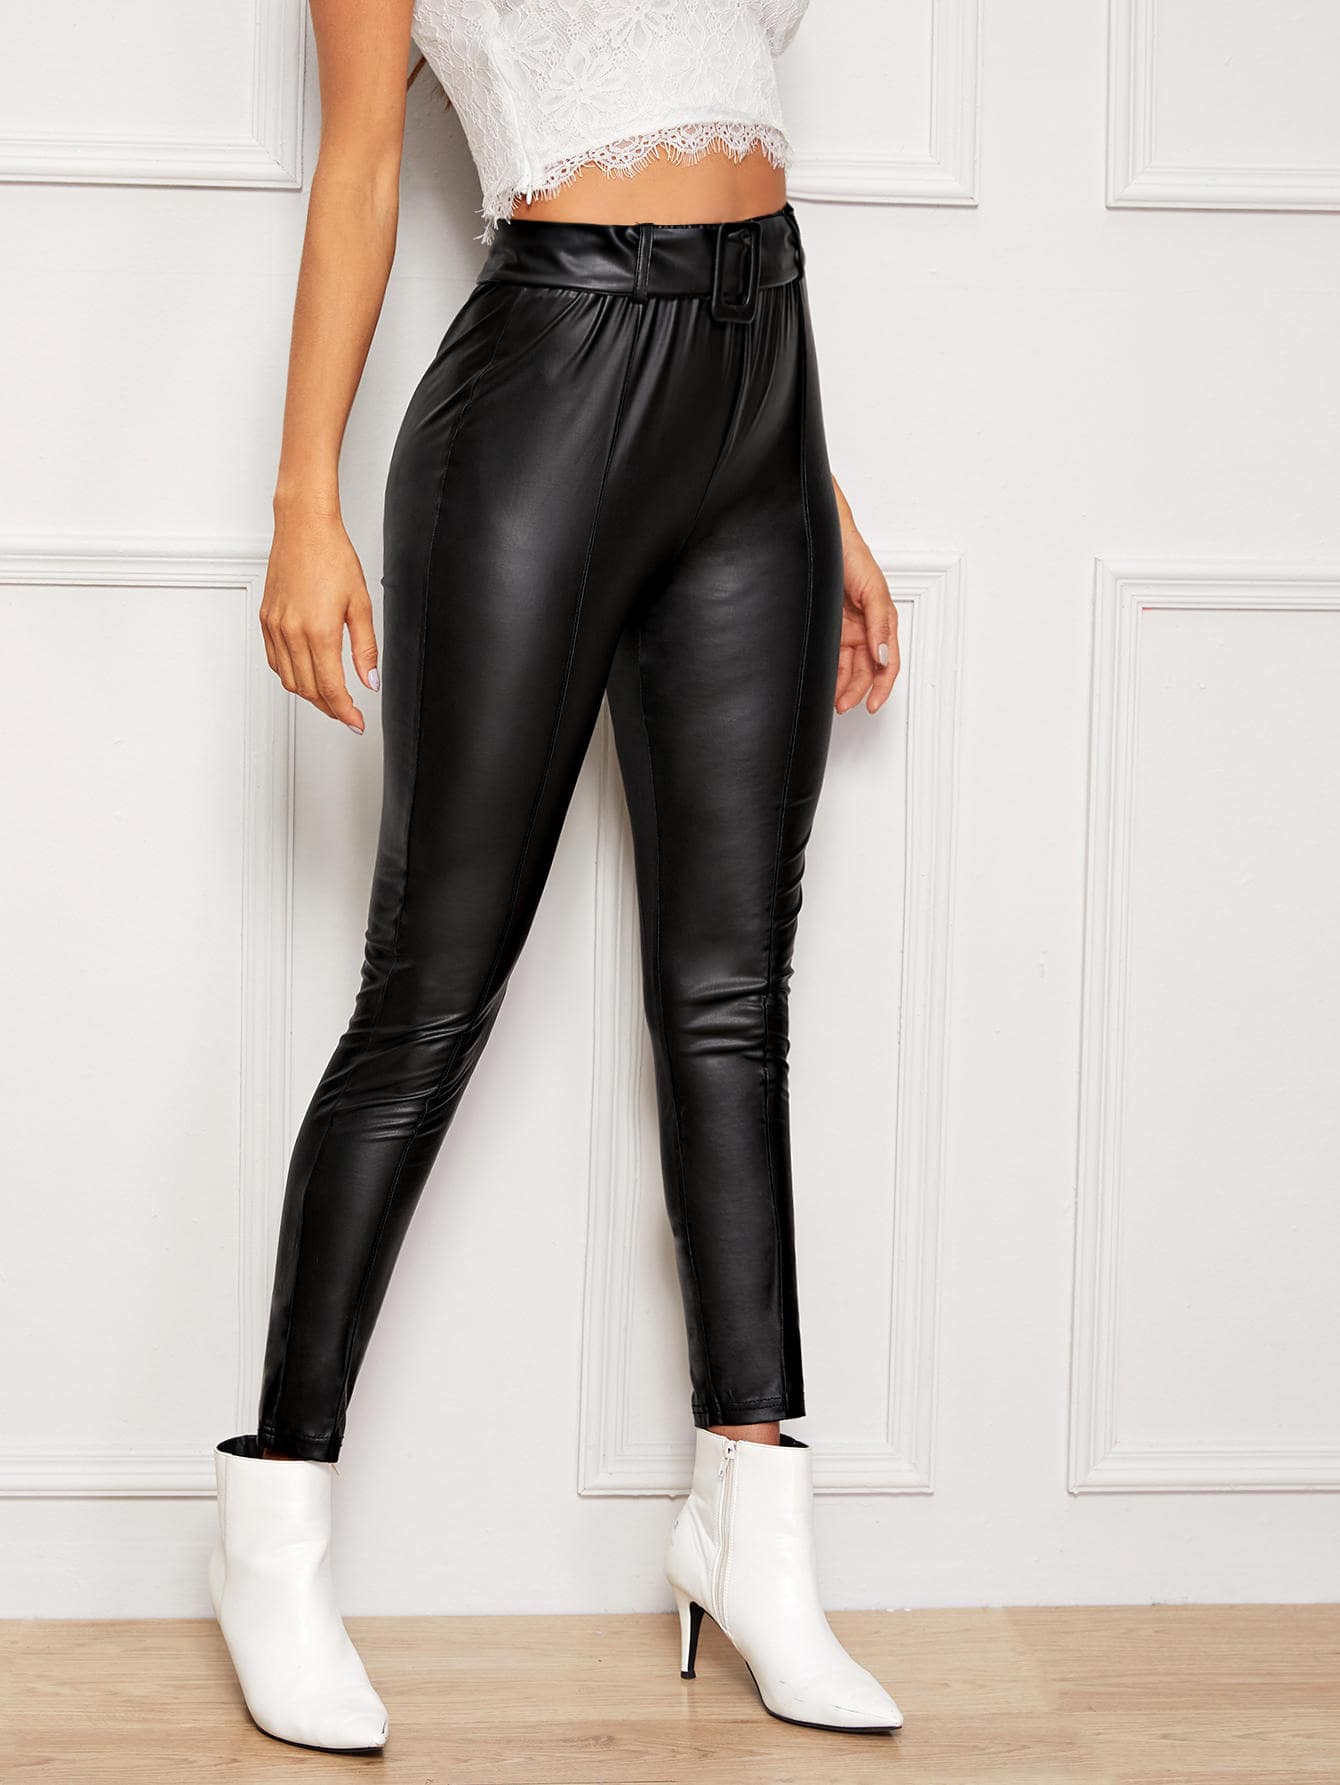 Buckle Belted Leather Look Pants